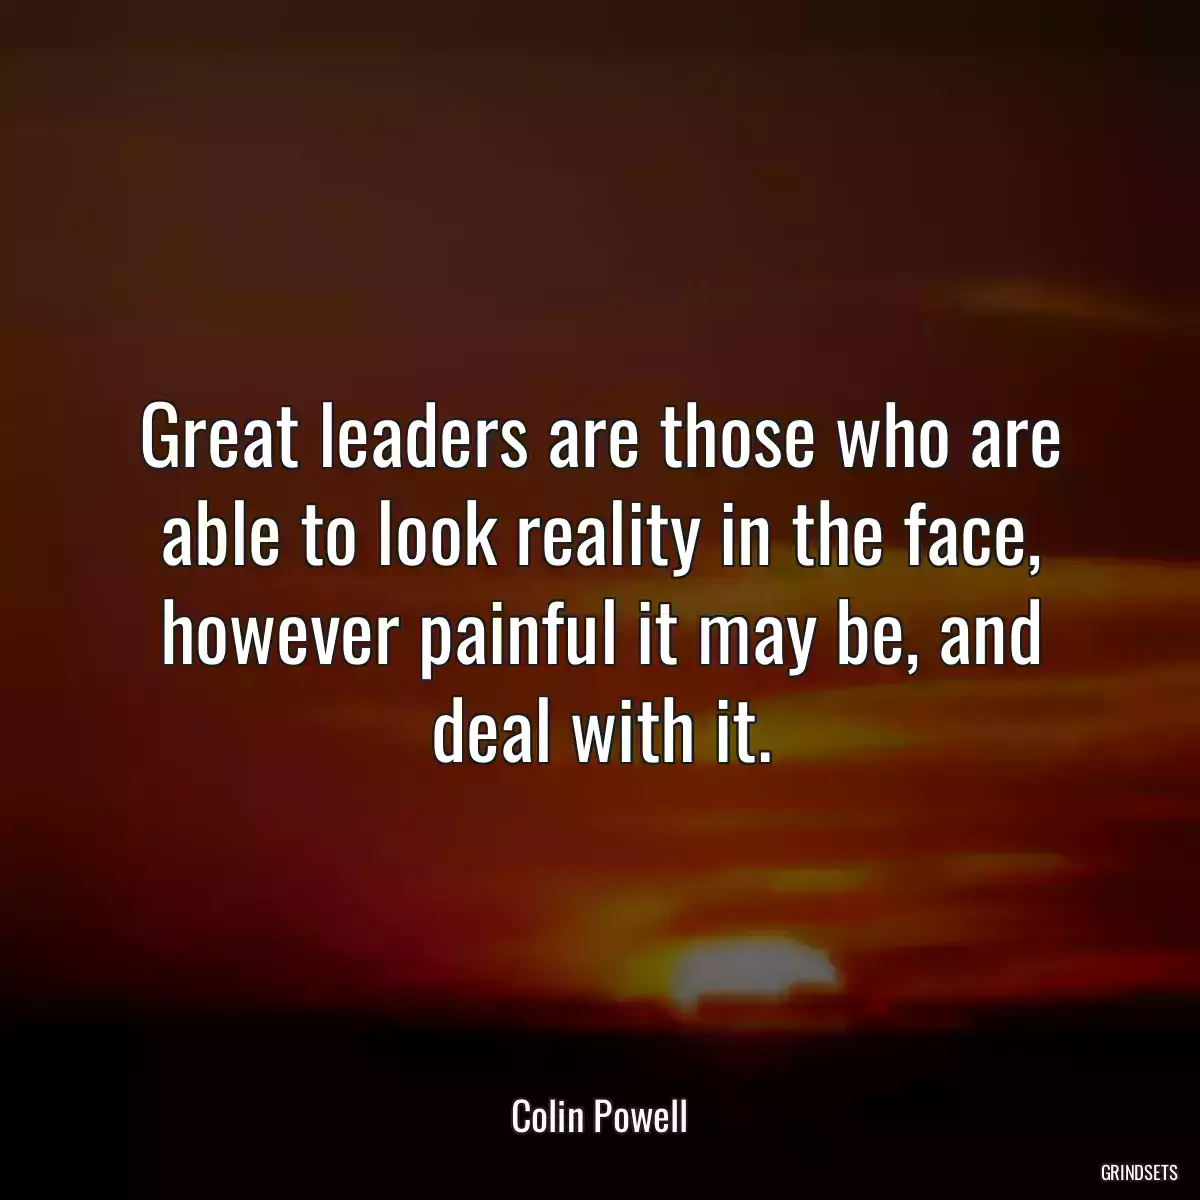 Great leaders are those who are able to look reality in the face, however painful it may be, and deal with it.